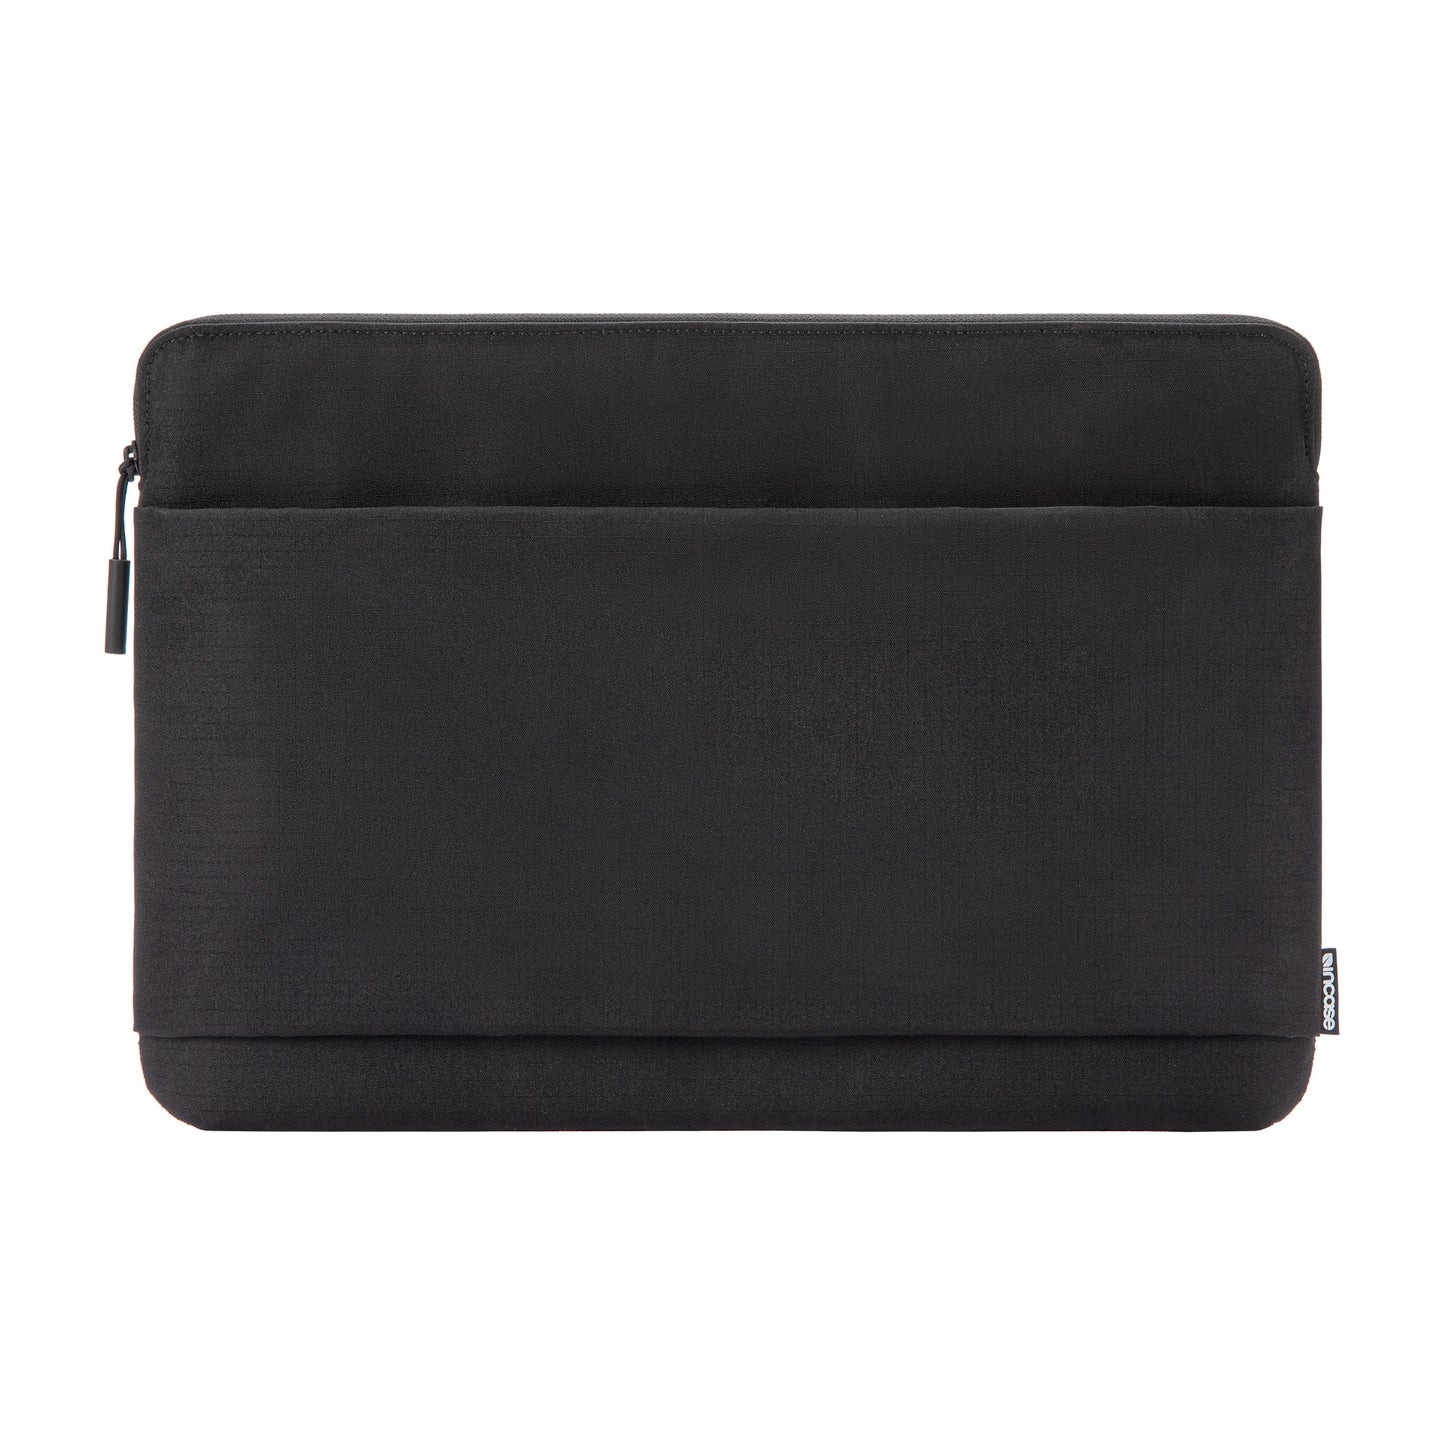 Go Sleeve for Up to 14" Laptop -Black-